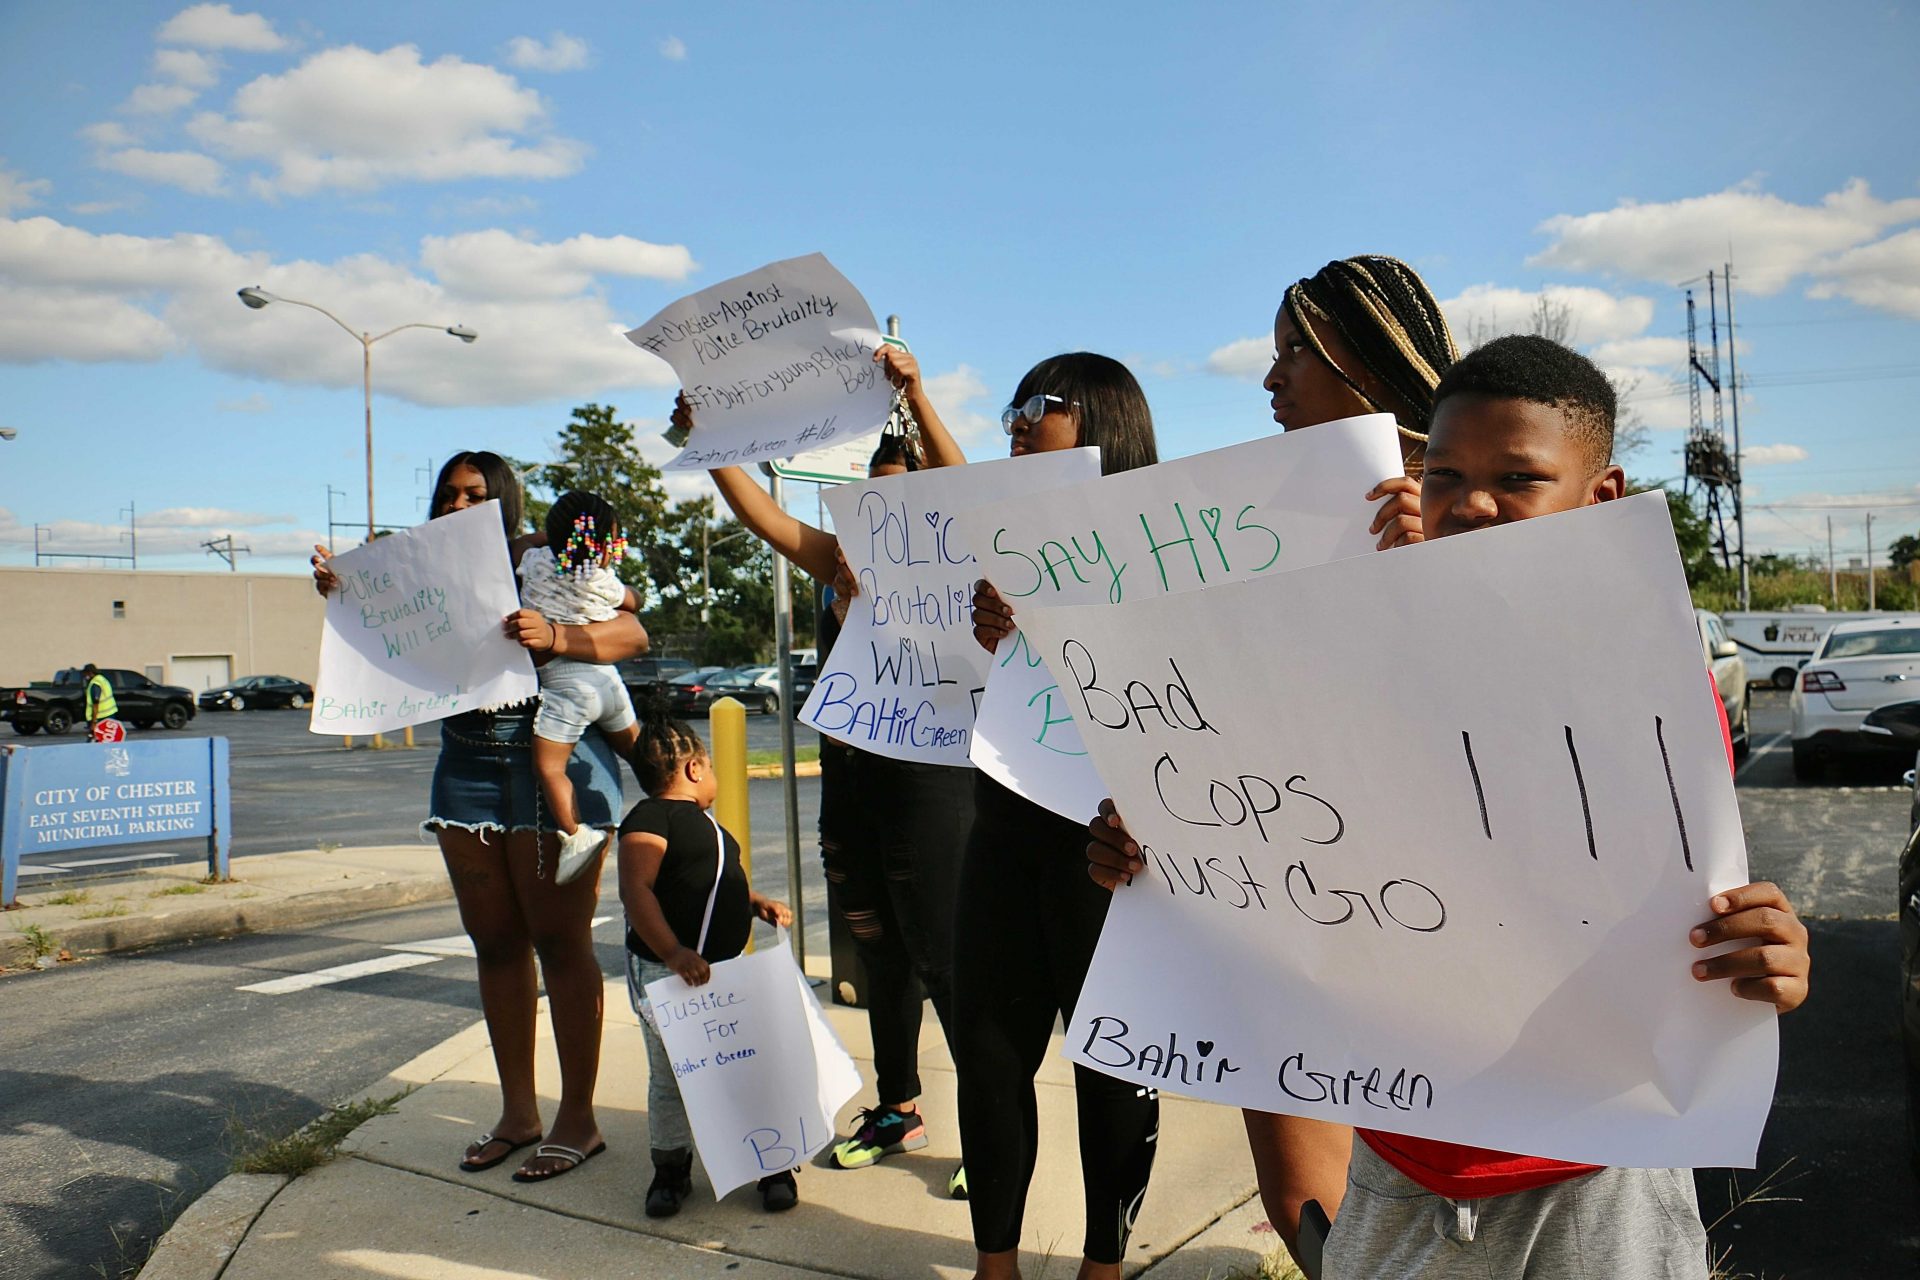 Family members and supporters of Bahir Green carry handmade signs to a press conference at Chester police headquarters. The 16-year-old remains in custody after his arrest Friday, Sept. 17, 2021. A video appeared to show police beating him while making the arrest.